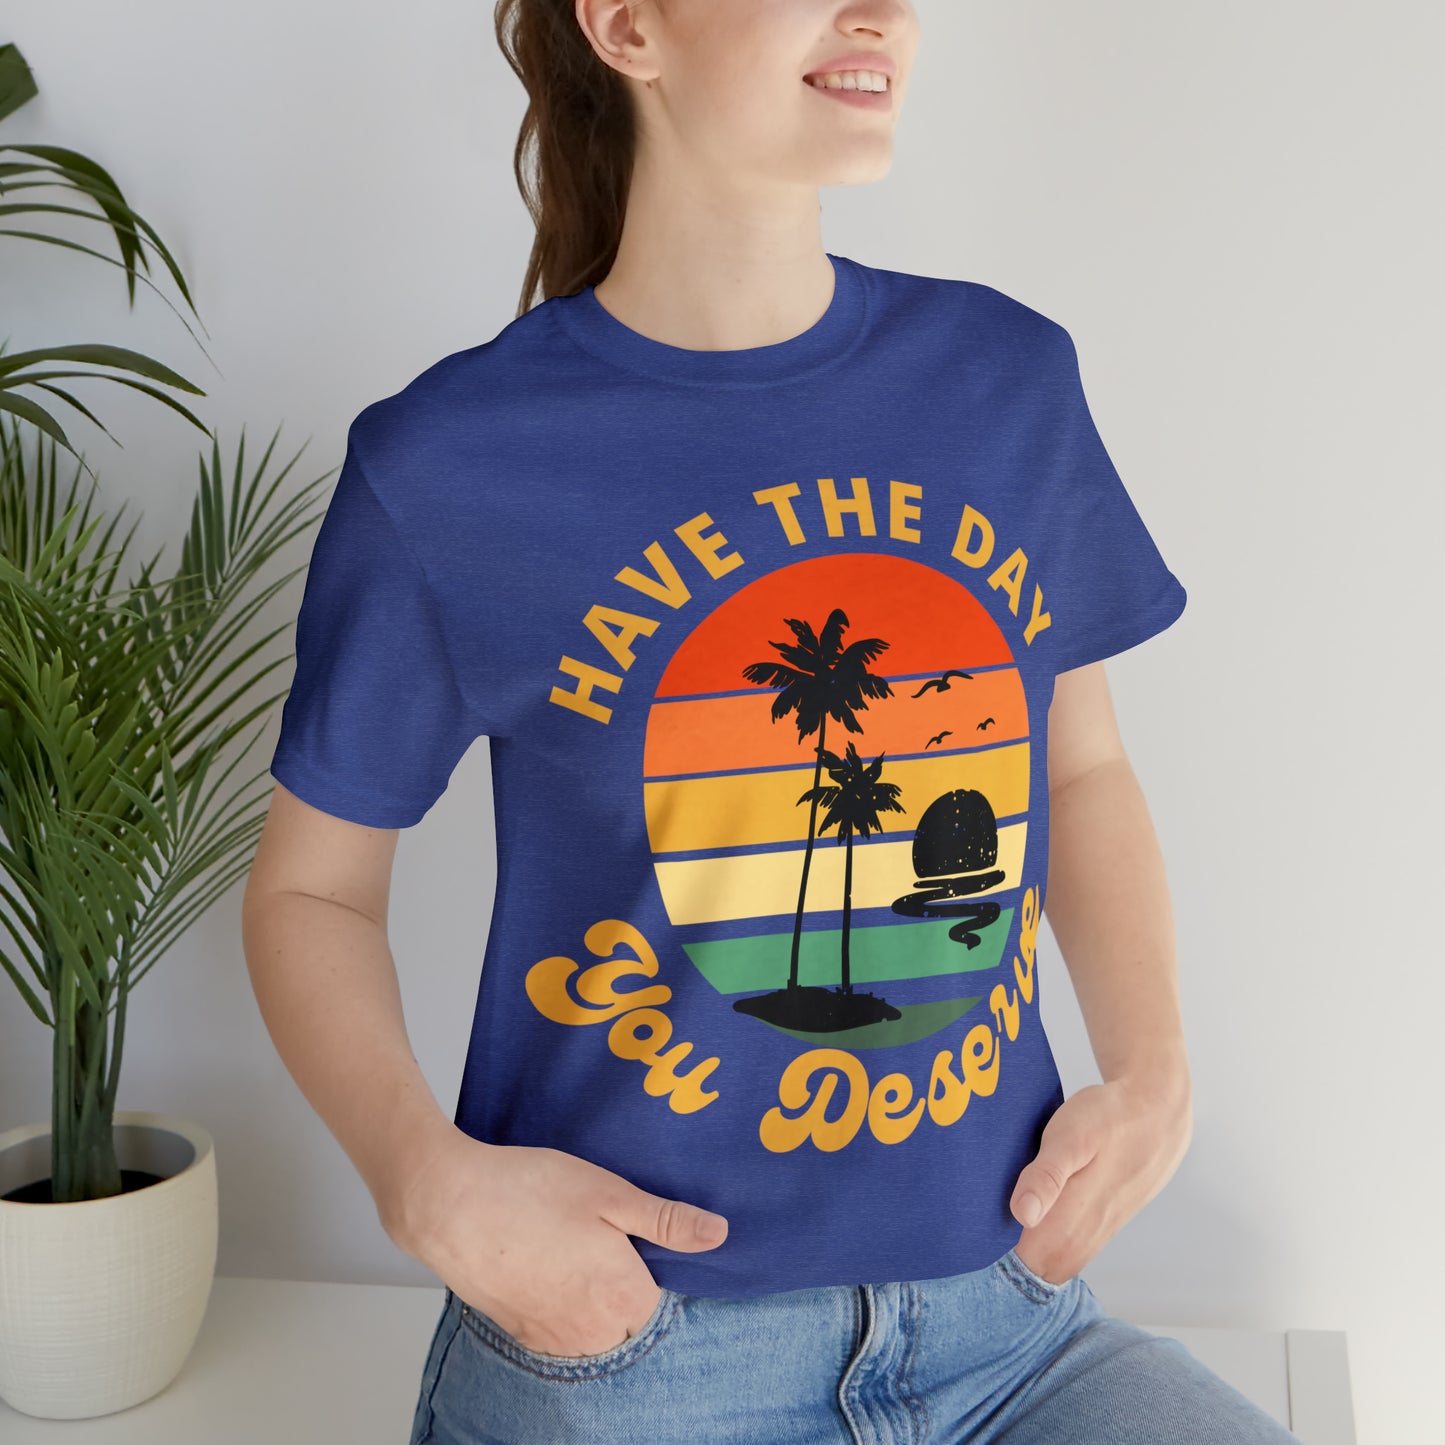 Inspirational Graphic Tee, Motivational Tee, Have the Day You Deserve Shirt, Positive Vibes Shirt, Trendy shirt and Eye Catching shirt Beach